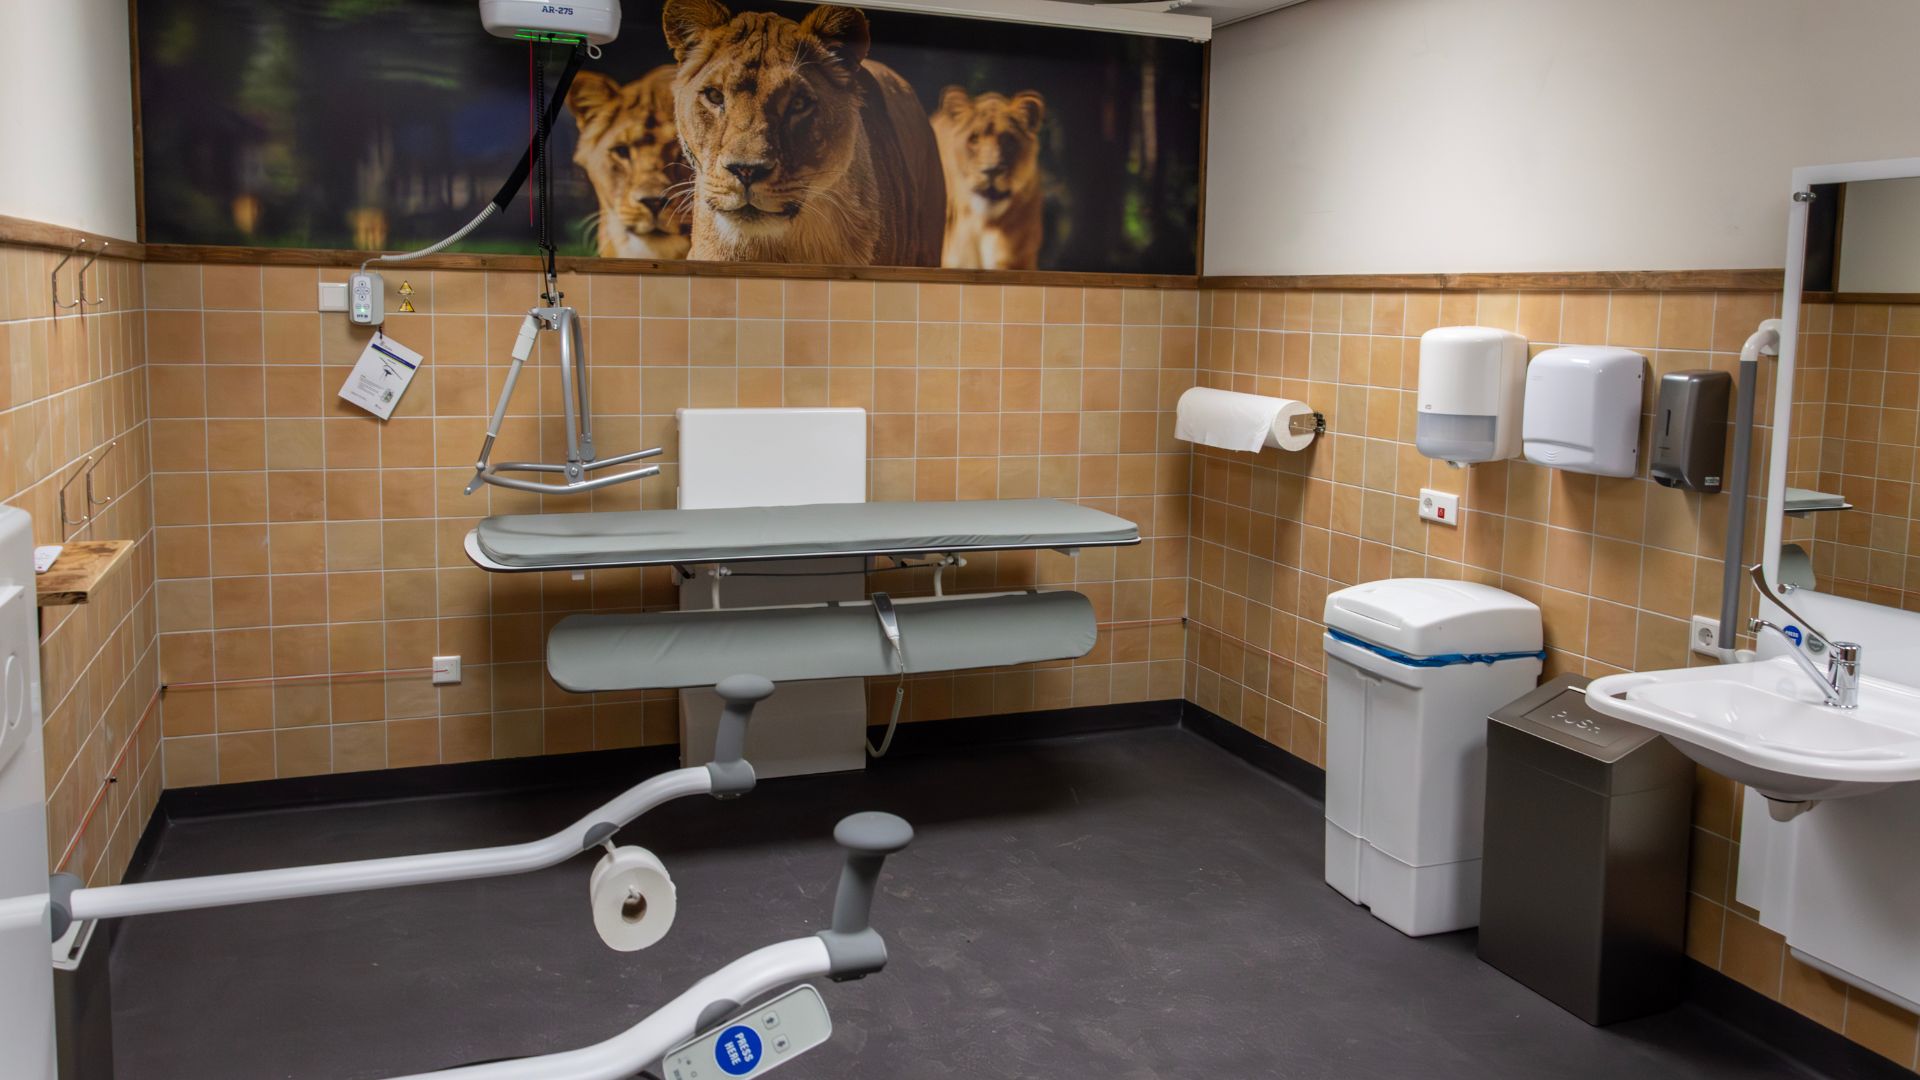 Changingplaces toilet